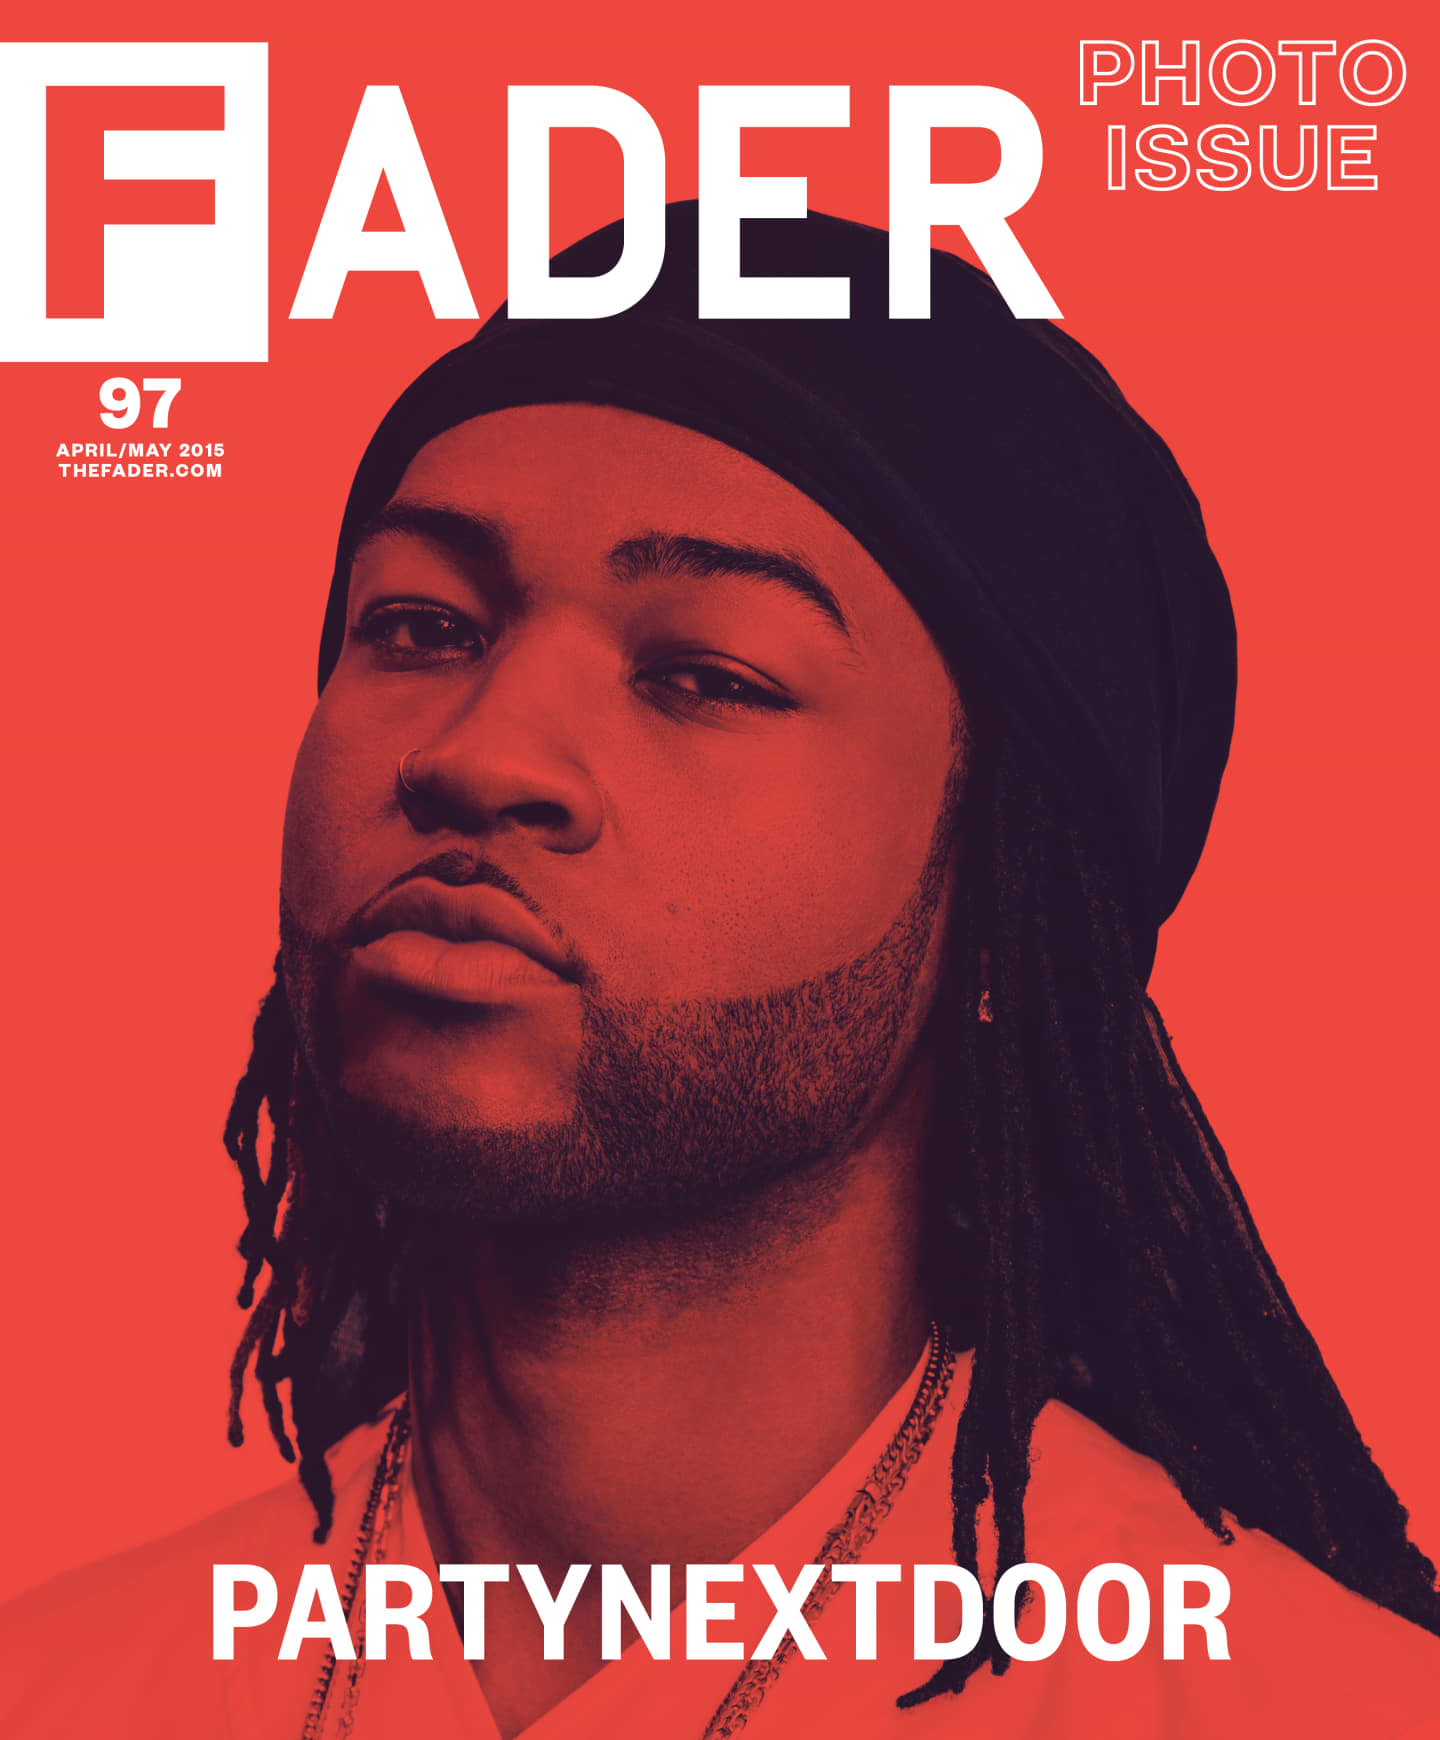 PARTYNEXTDOOR Speaks About His Music For The First Time ...
